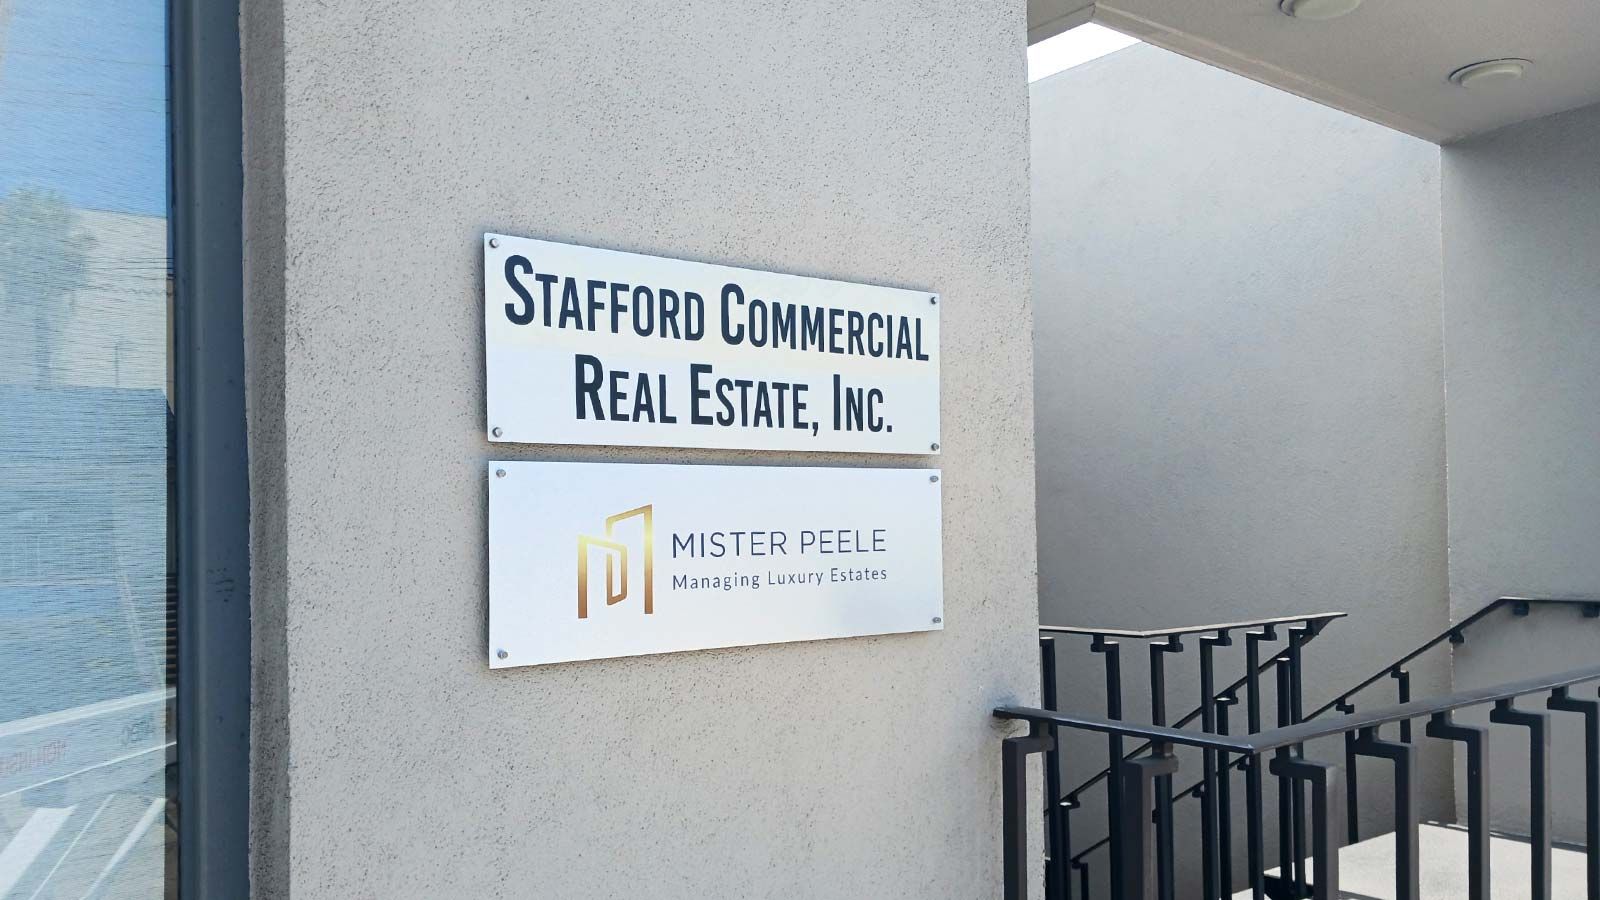 Stafford Commercial Real Estate aluminum sign on the wall